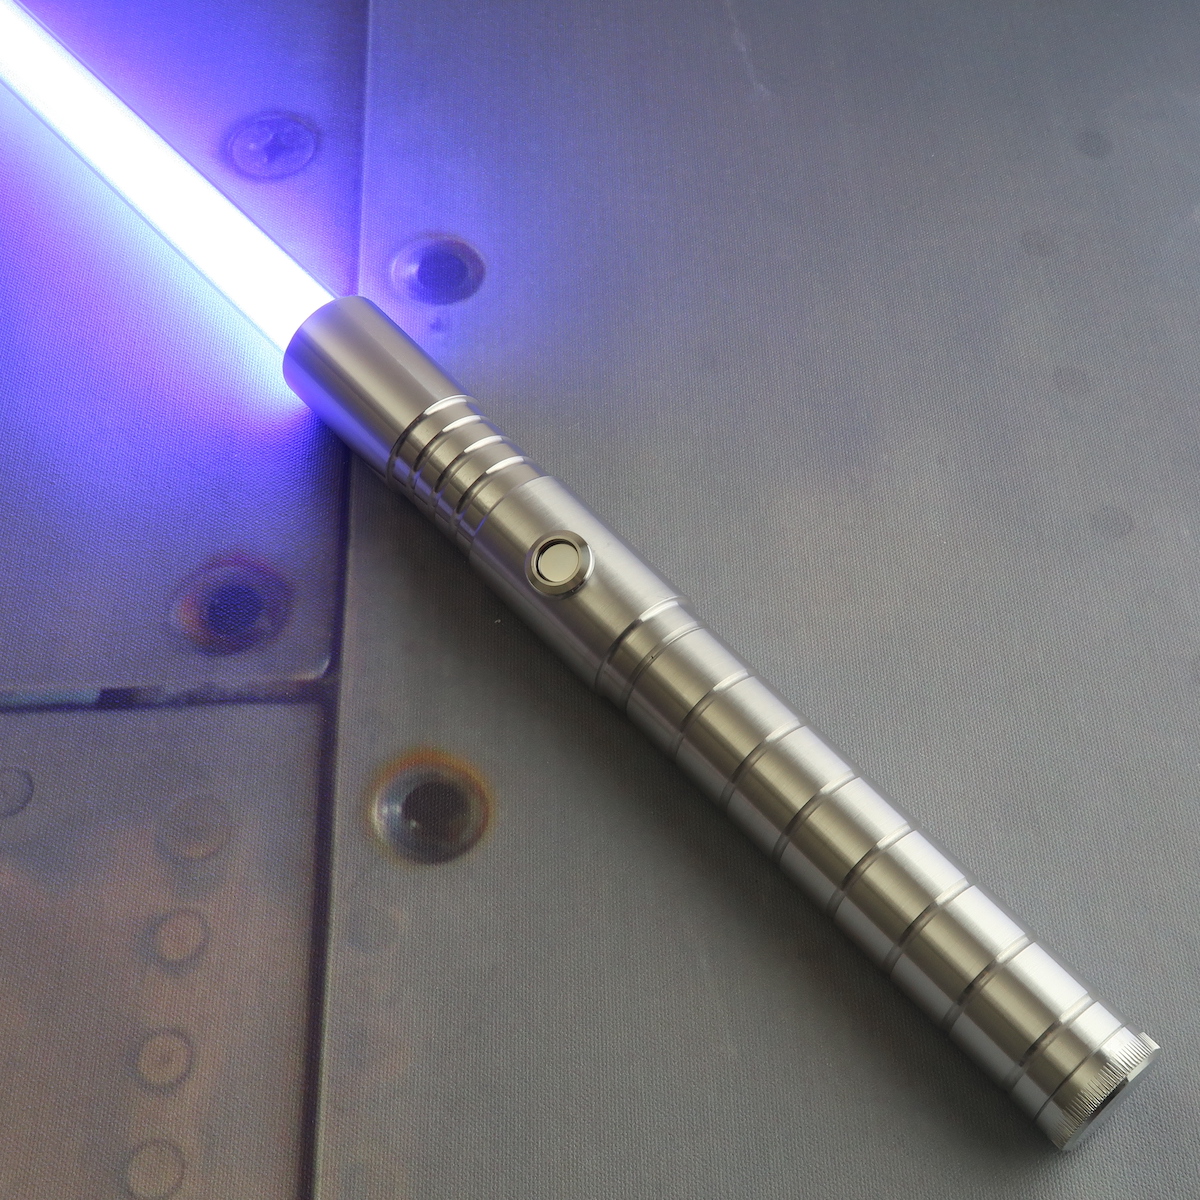 Aeon v2 Custom Combat Ready Lightsaber w/ Millions of Combinations Incl. Sound & LED Options.